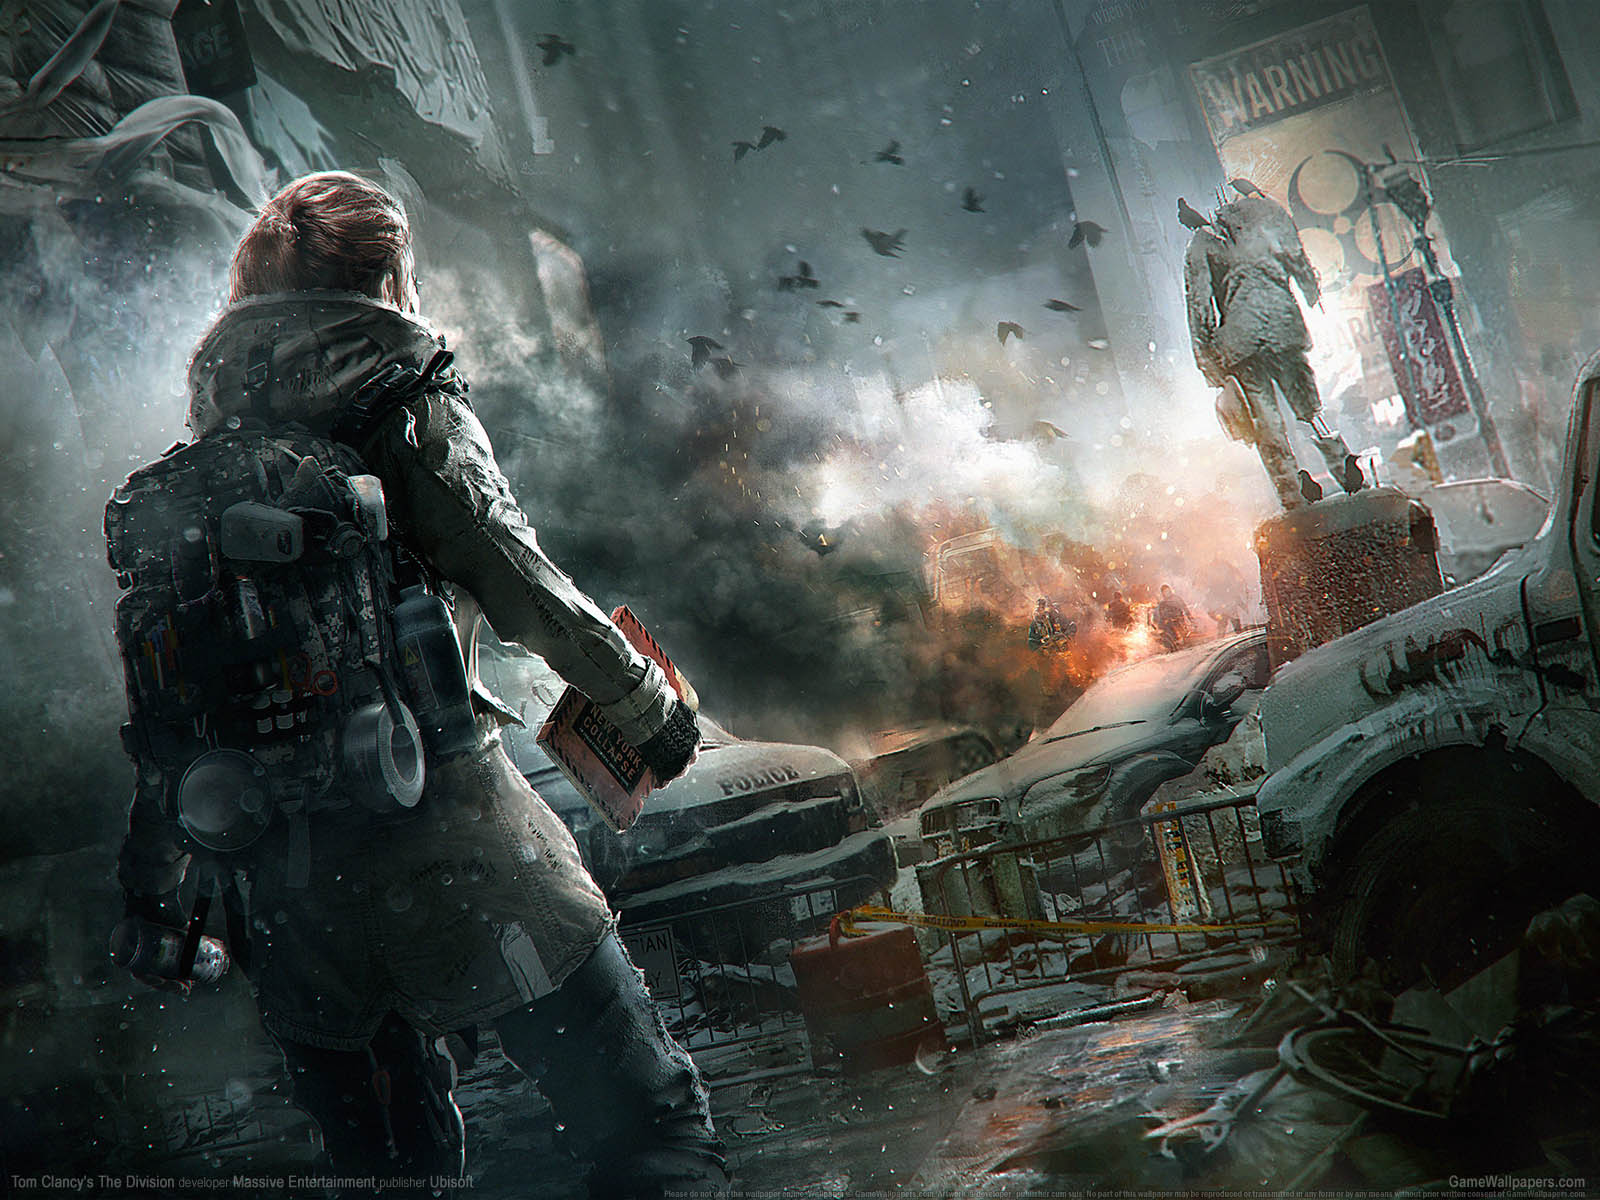 Tom Clancy%5C%27s The Division wallpaper 08 1600x1200